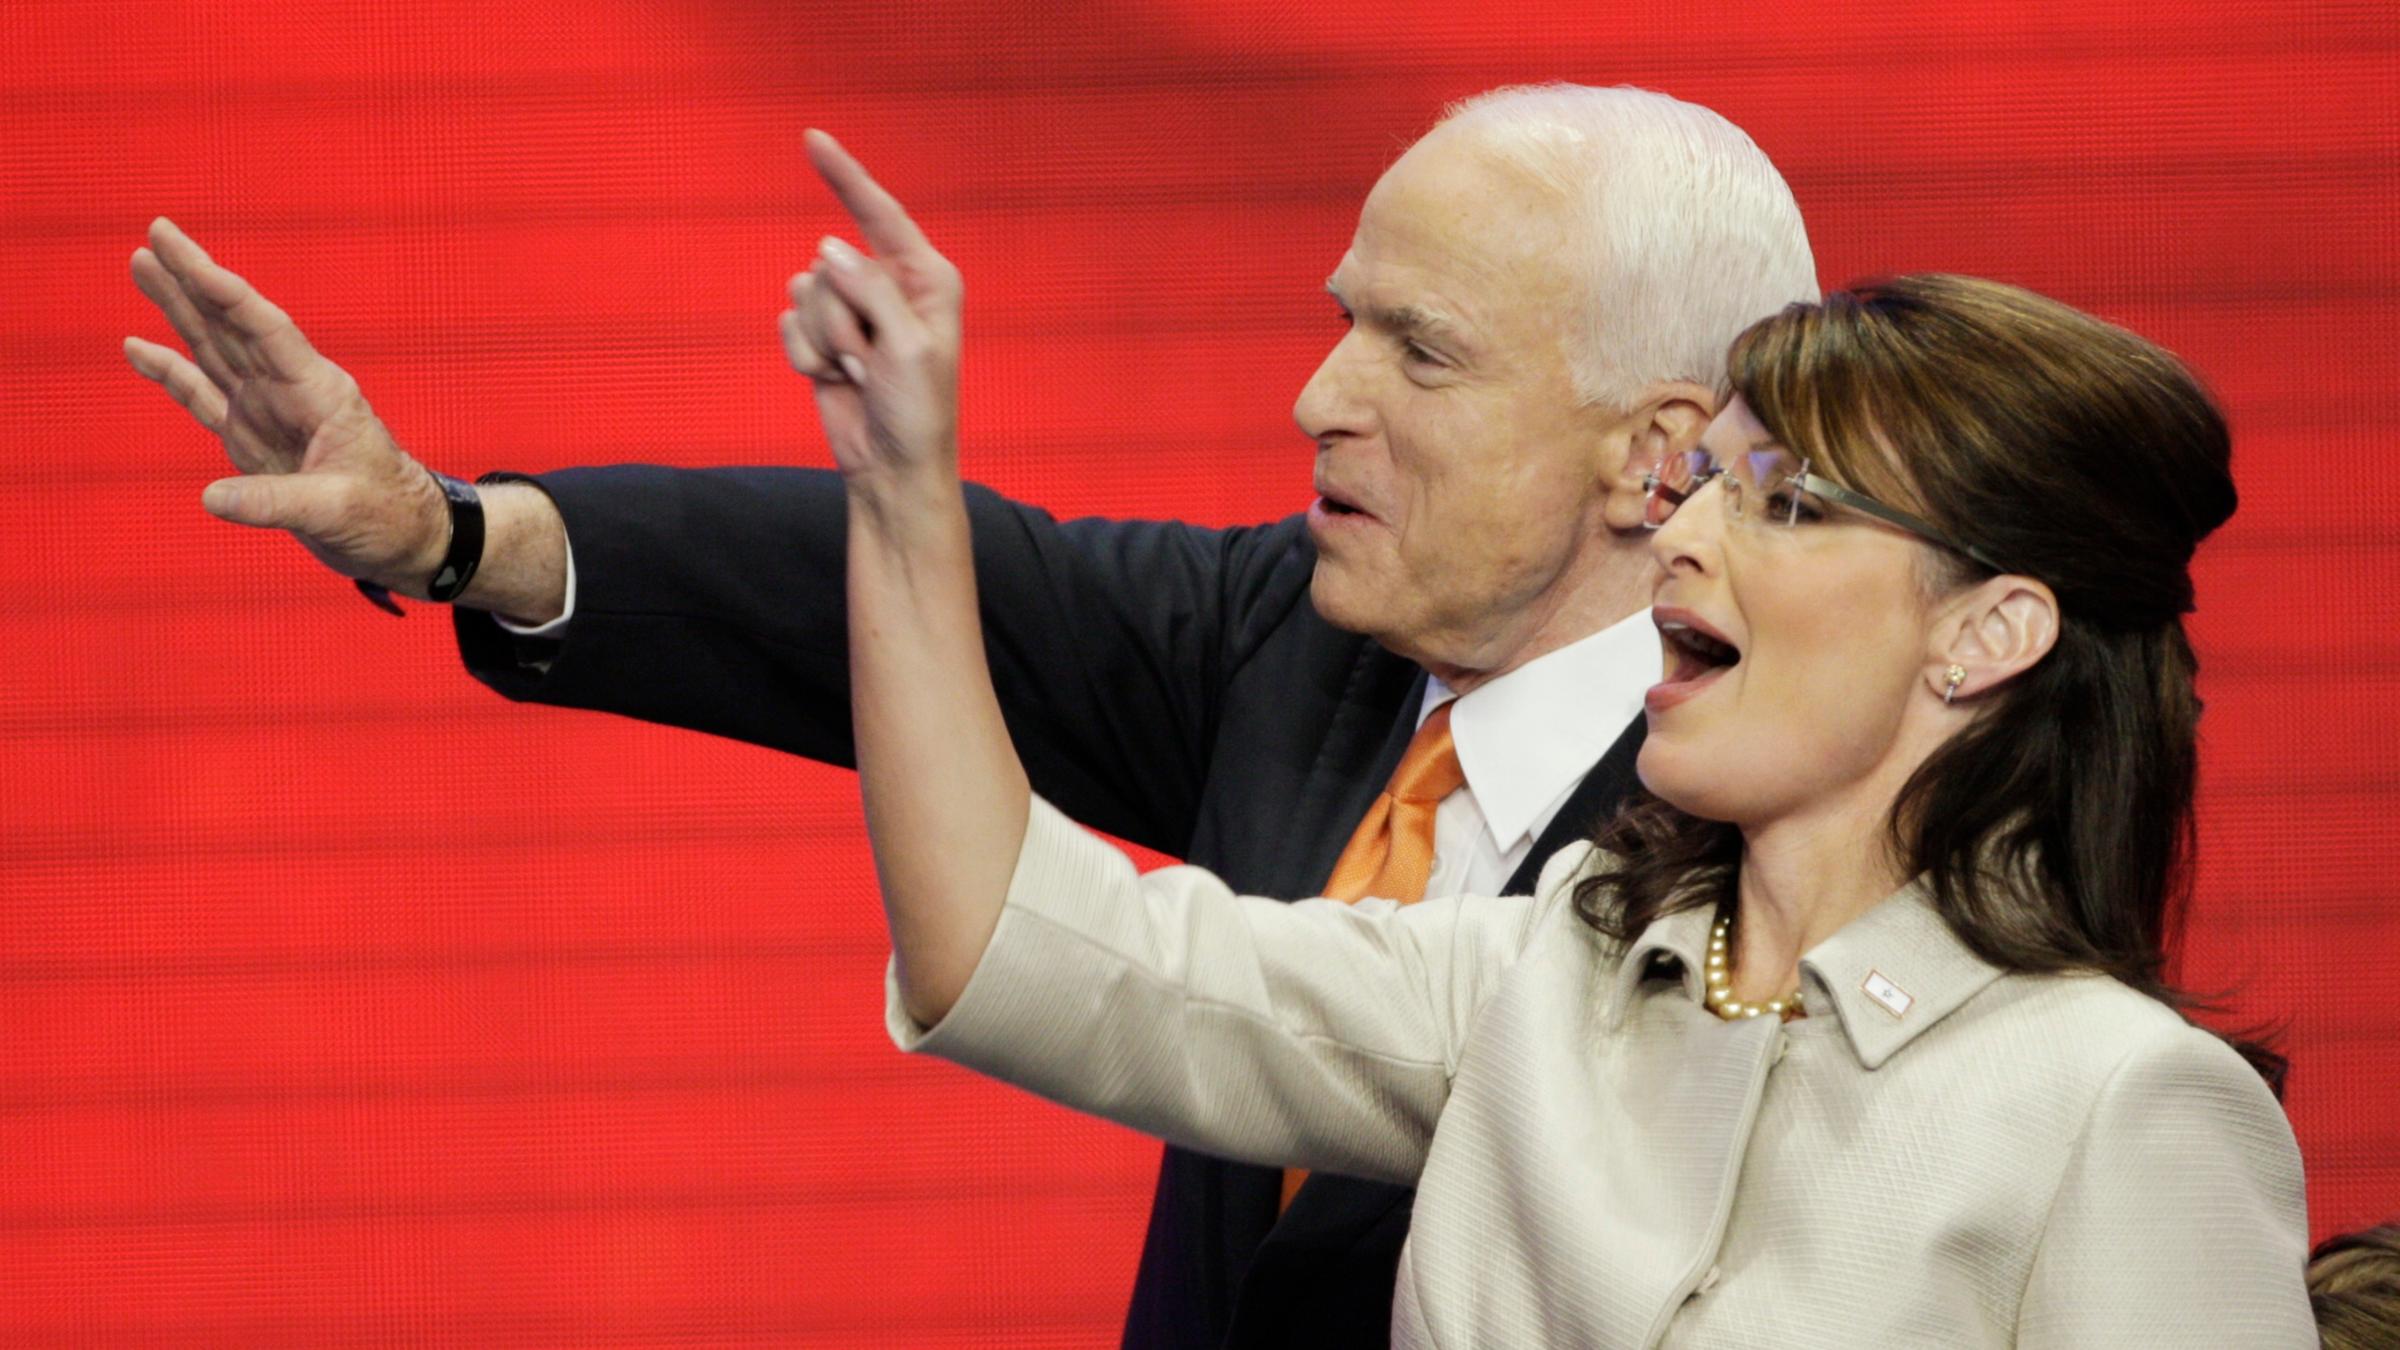 Presidential candidate John McCain with Sarah Palin at a 2008 campaign event